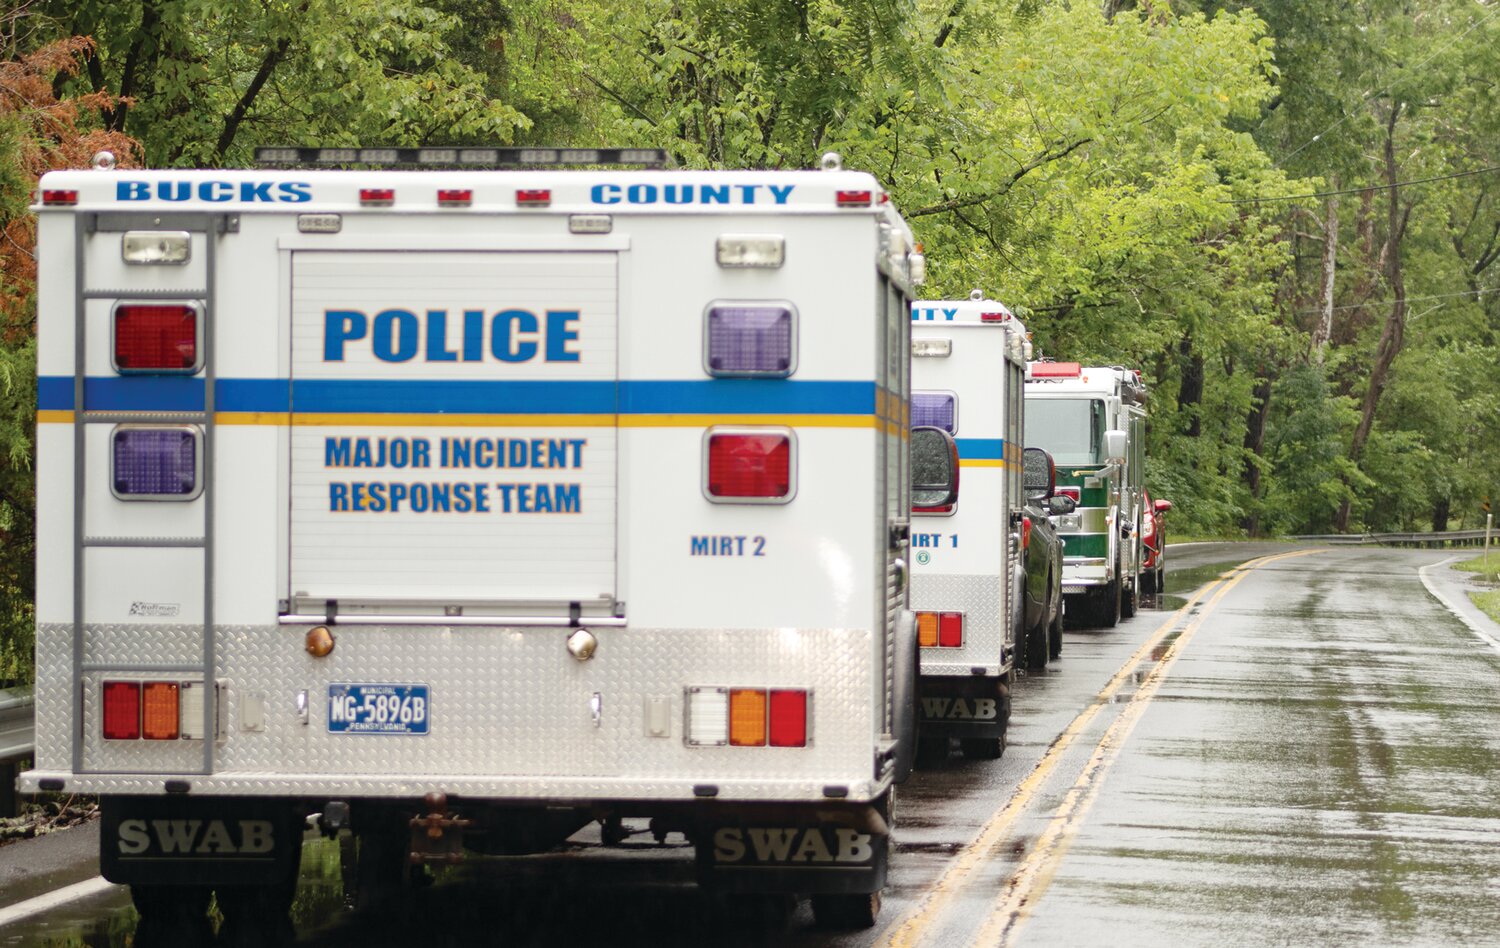 Bucks County first responders’ vehicles line the road near a flooded out area of Upper Makefield Sunday.